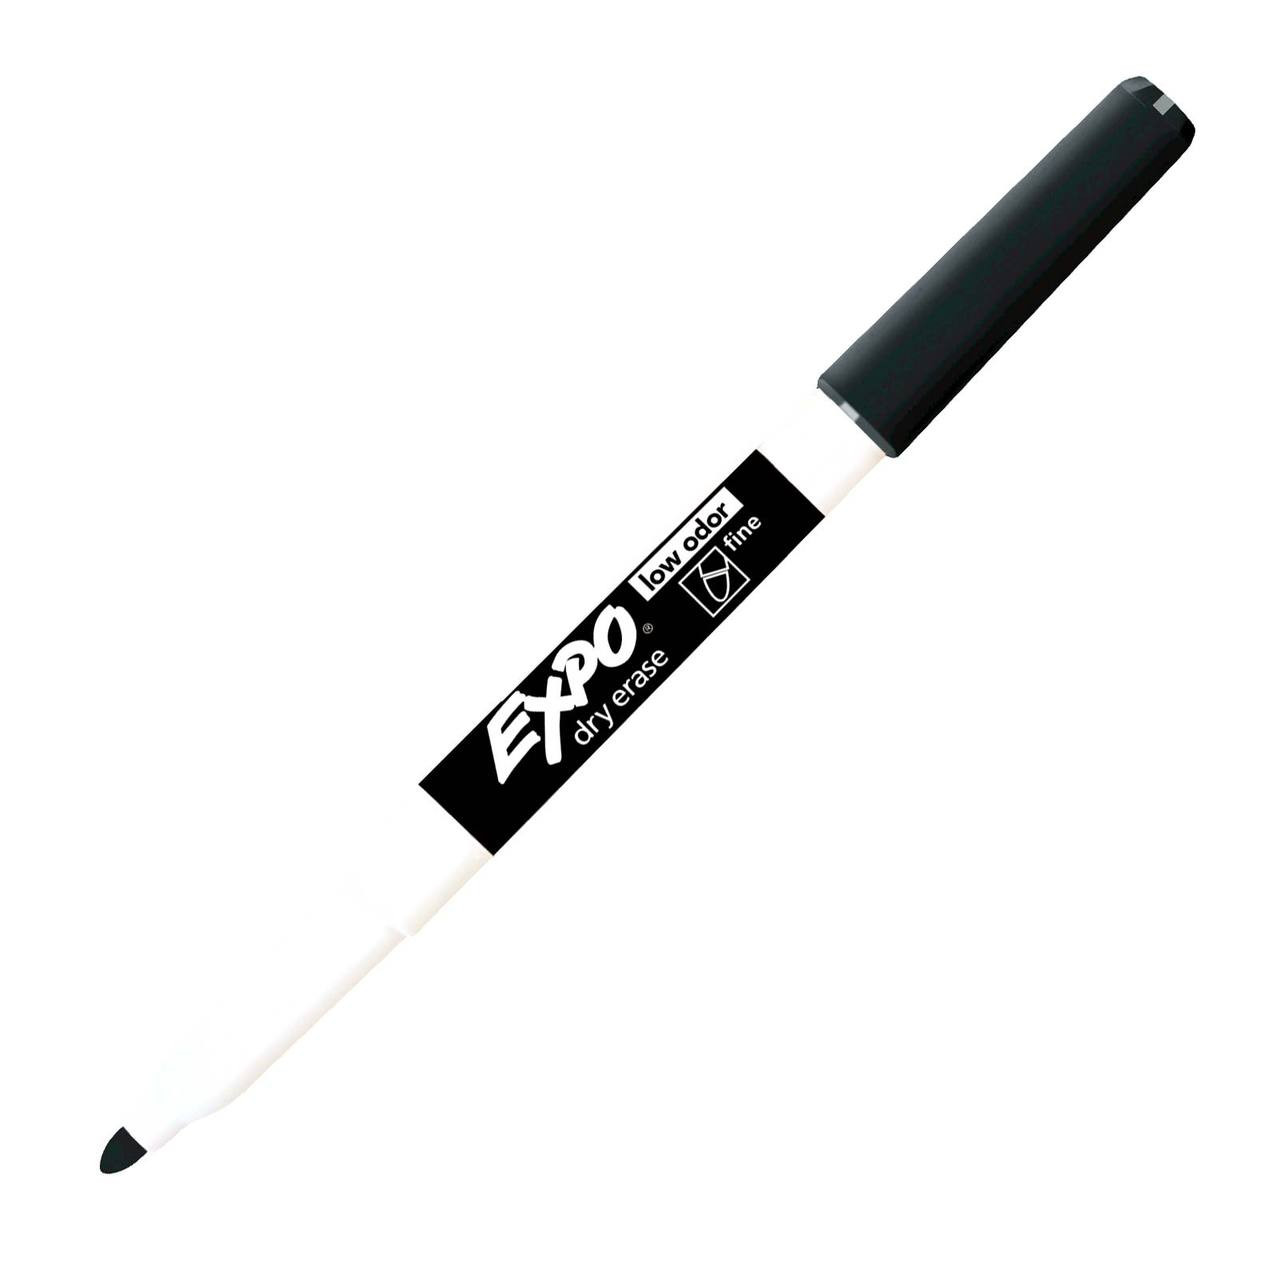 Expo Low-Odor Dry Erase Marker Pack, Extra-Fine Needle Tip